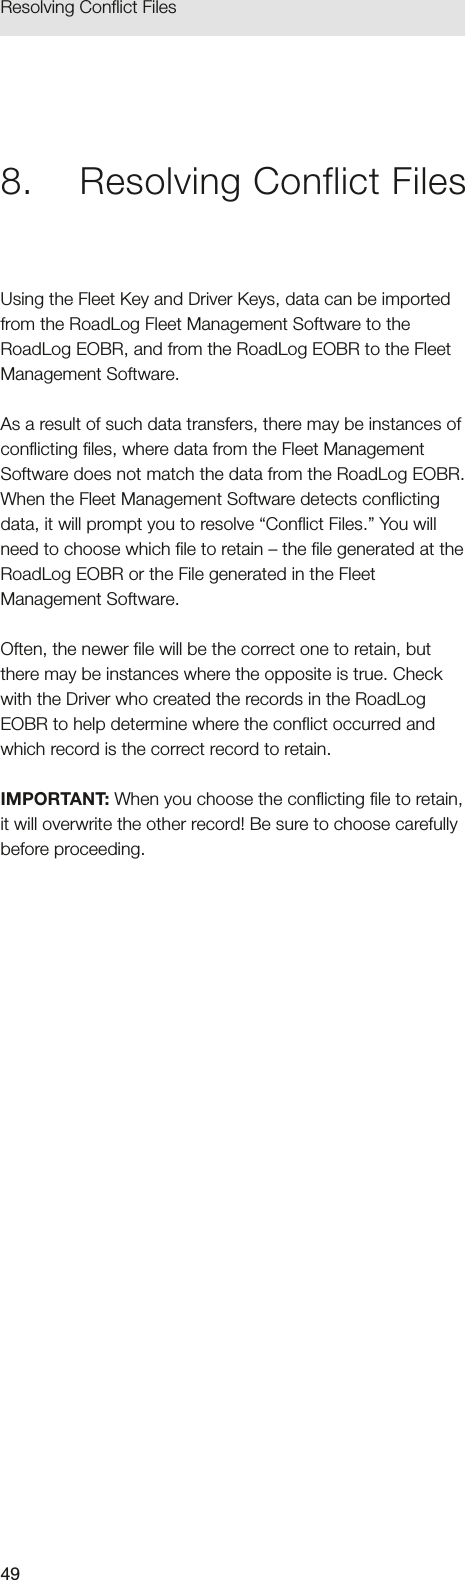 49Resolving Conflict Files8.  Resolving Conflict FilesUsing the Fleet Key and Driver Keys, data can be imported from the RoadLog Fleet Management Software to the RoadLog EOBR, and from the RoadLog EOBR to the Fleet Management Software. As a result of such data transfers, there may be instances of conflicting files, where data from the Fleet Management Software does not match the data from the RoadLog EOBR. When the Fleet Management Software detects conflicting data, it will prompt you to resolve “Conflict Files.” You will need to choose which file to retain – the file generated at the RoadLog EOBR or the File generated in the Fleet Management Software. Often, the newer file will be the correct one to retain, but there may be instances where the opposite is true. Check with the Driver who created the records in the RoadLog EOBR to help determine where the conflict occurred and which record is the correct record to retain.IMPORTANT: When you choose the conflicting file to retain, it will overwrite the other record! Be sure to choose carefully before proceeding.